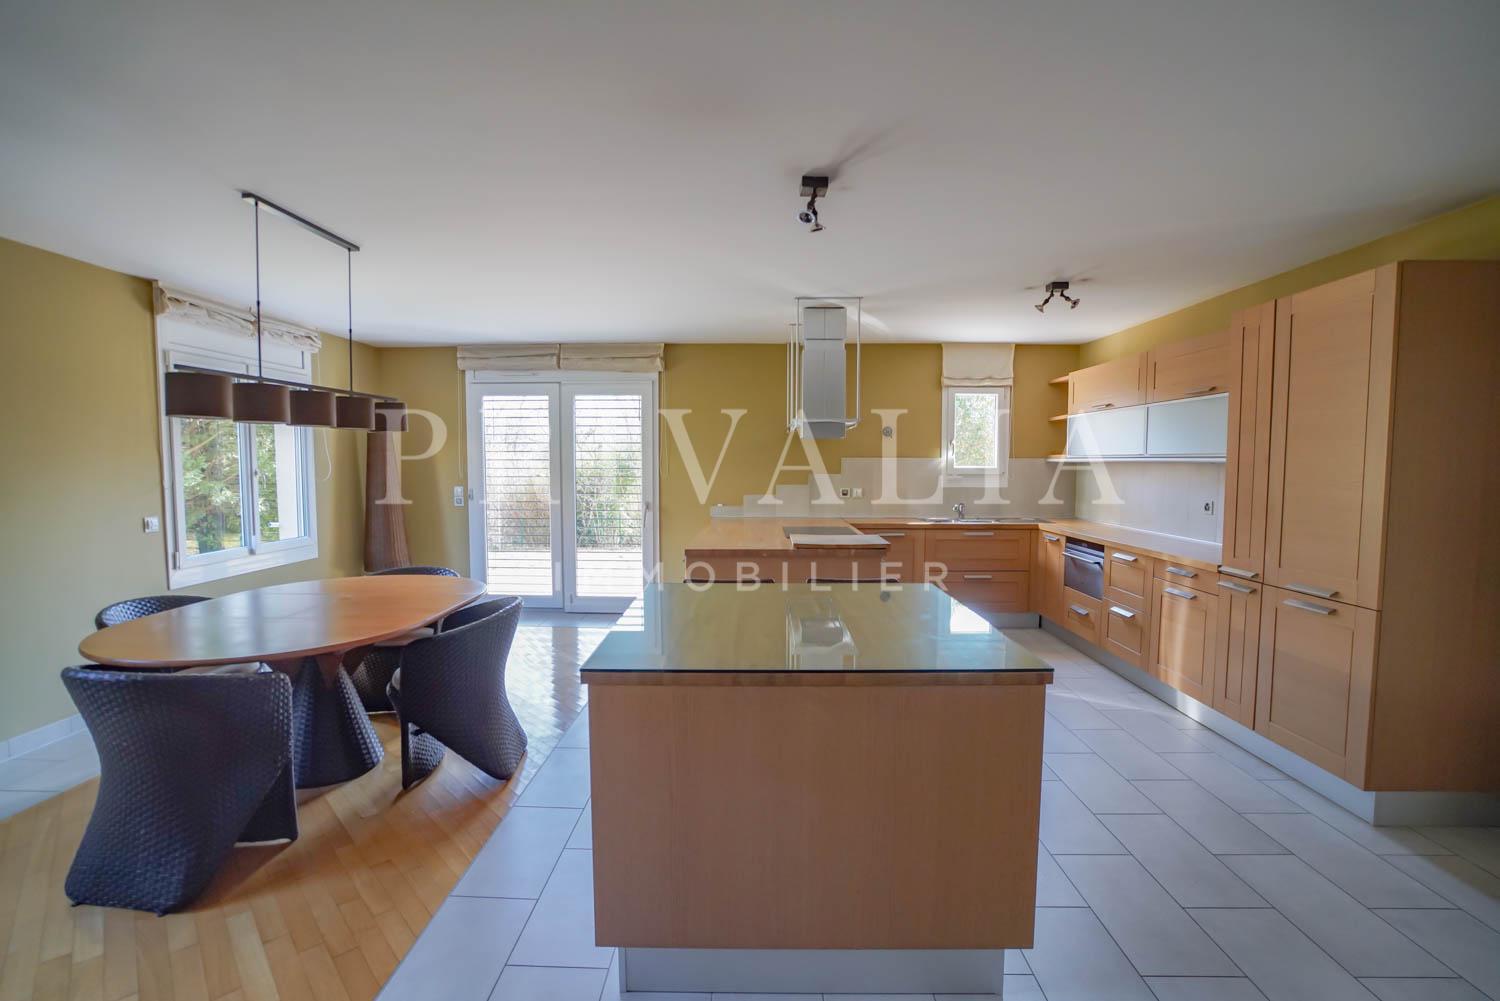 PrivaliaExclusive : Duplex of 253 m² PPE with basement of 133 m², terrace and garden